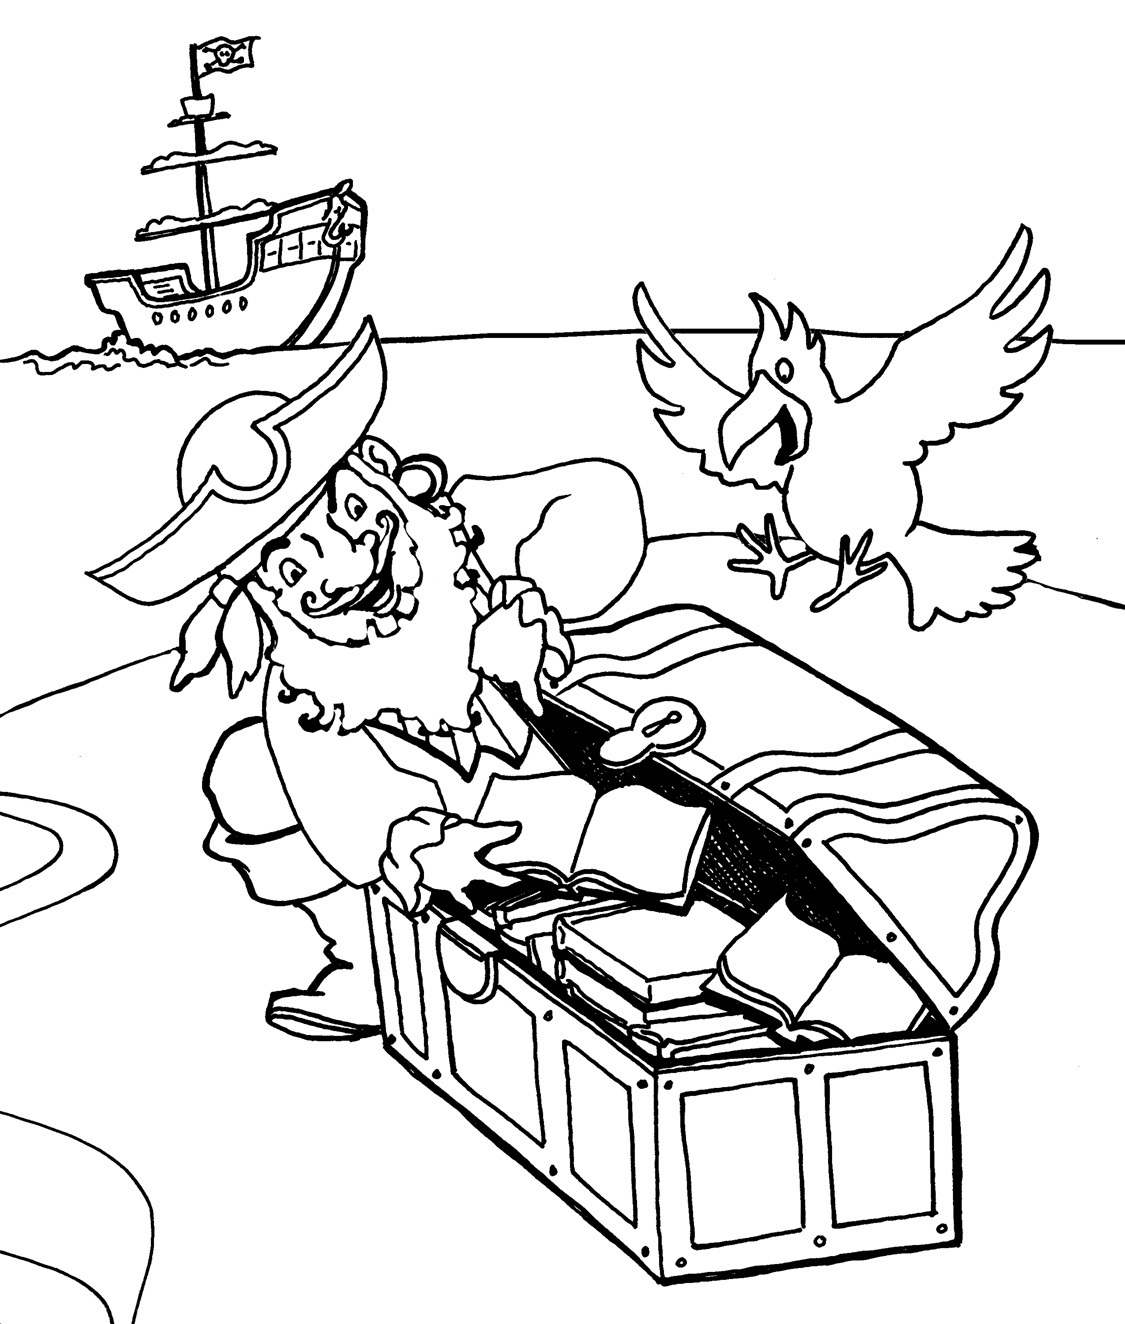 jake and pirates coloring pages - photo #33